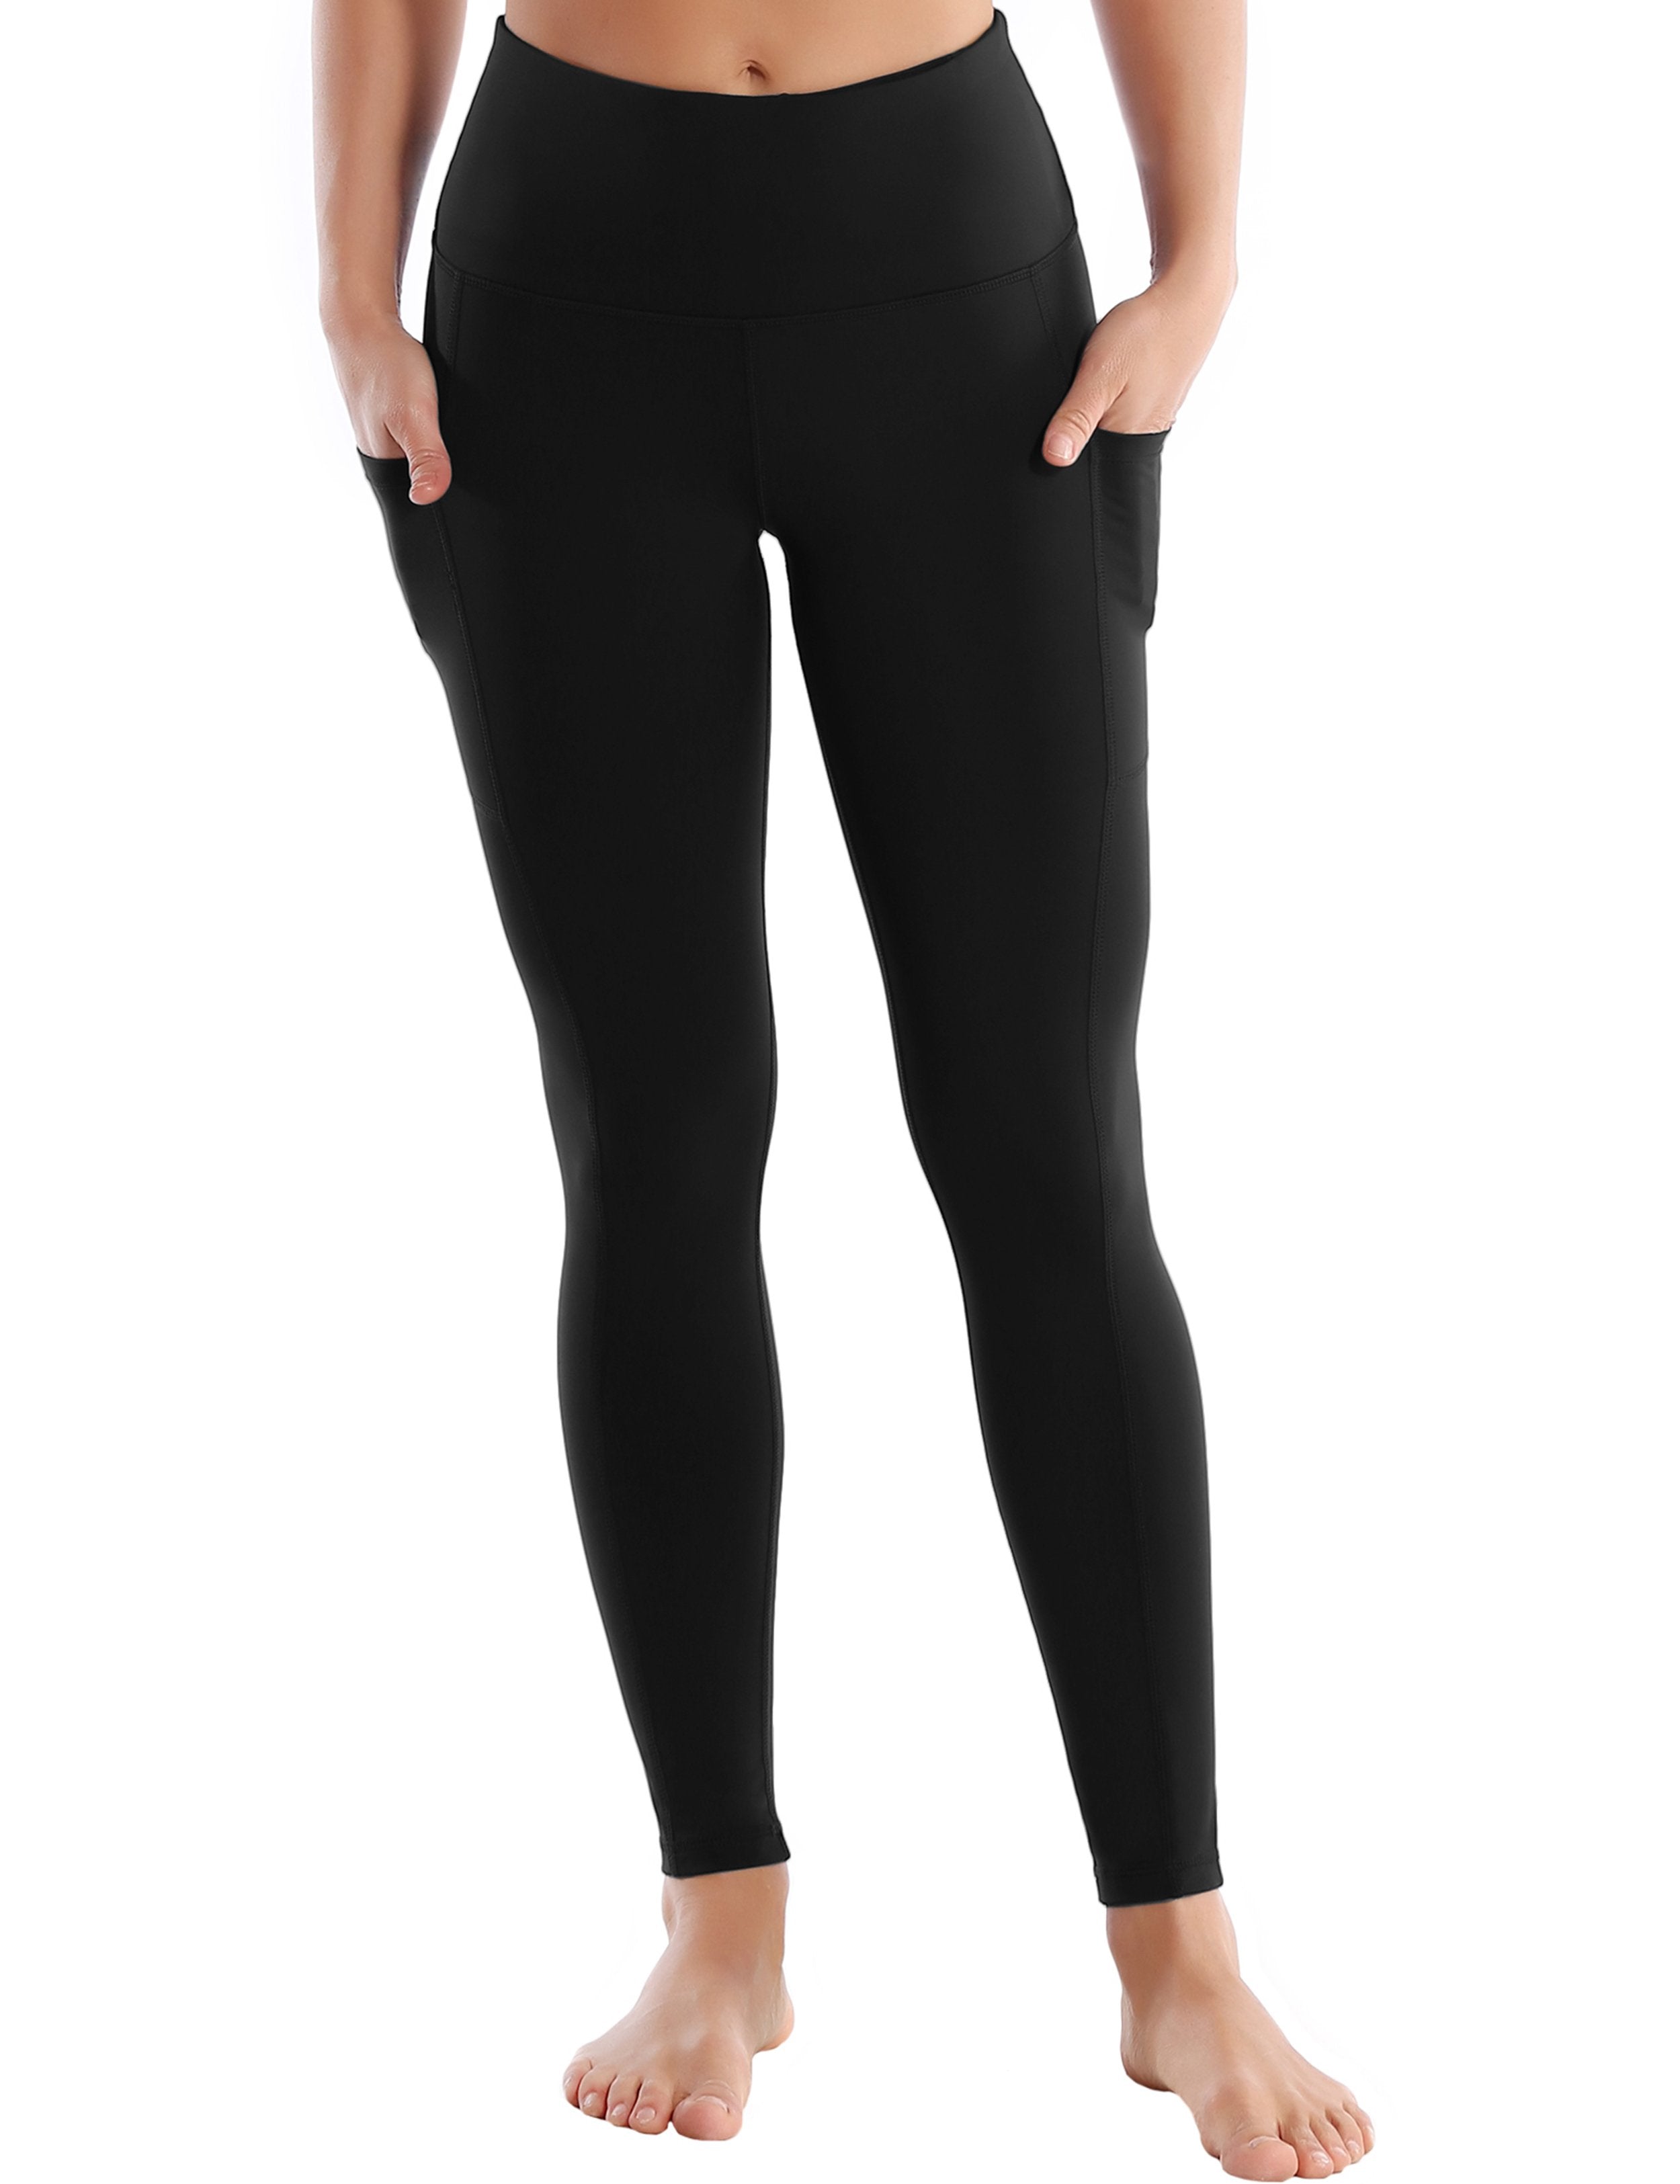 Hip Line Side Pockets Plus Size Pants black Sexy Hip Line Side Pockets 75%Nylon/25%Spandex Fabric doesn't attract lint easily 4-way stretch No see-through Moisture-wicking Tummy control Inner pocket Two lengths